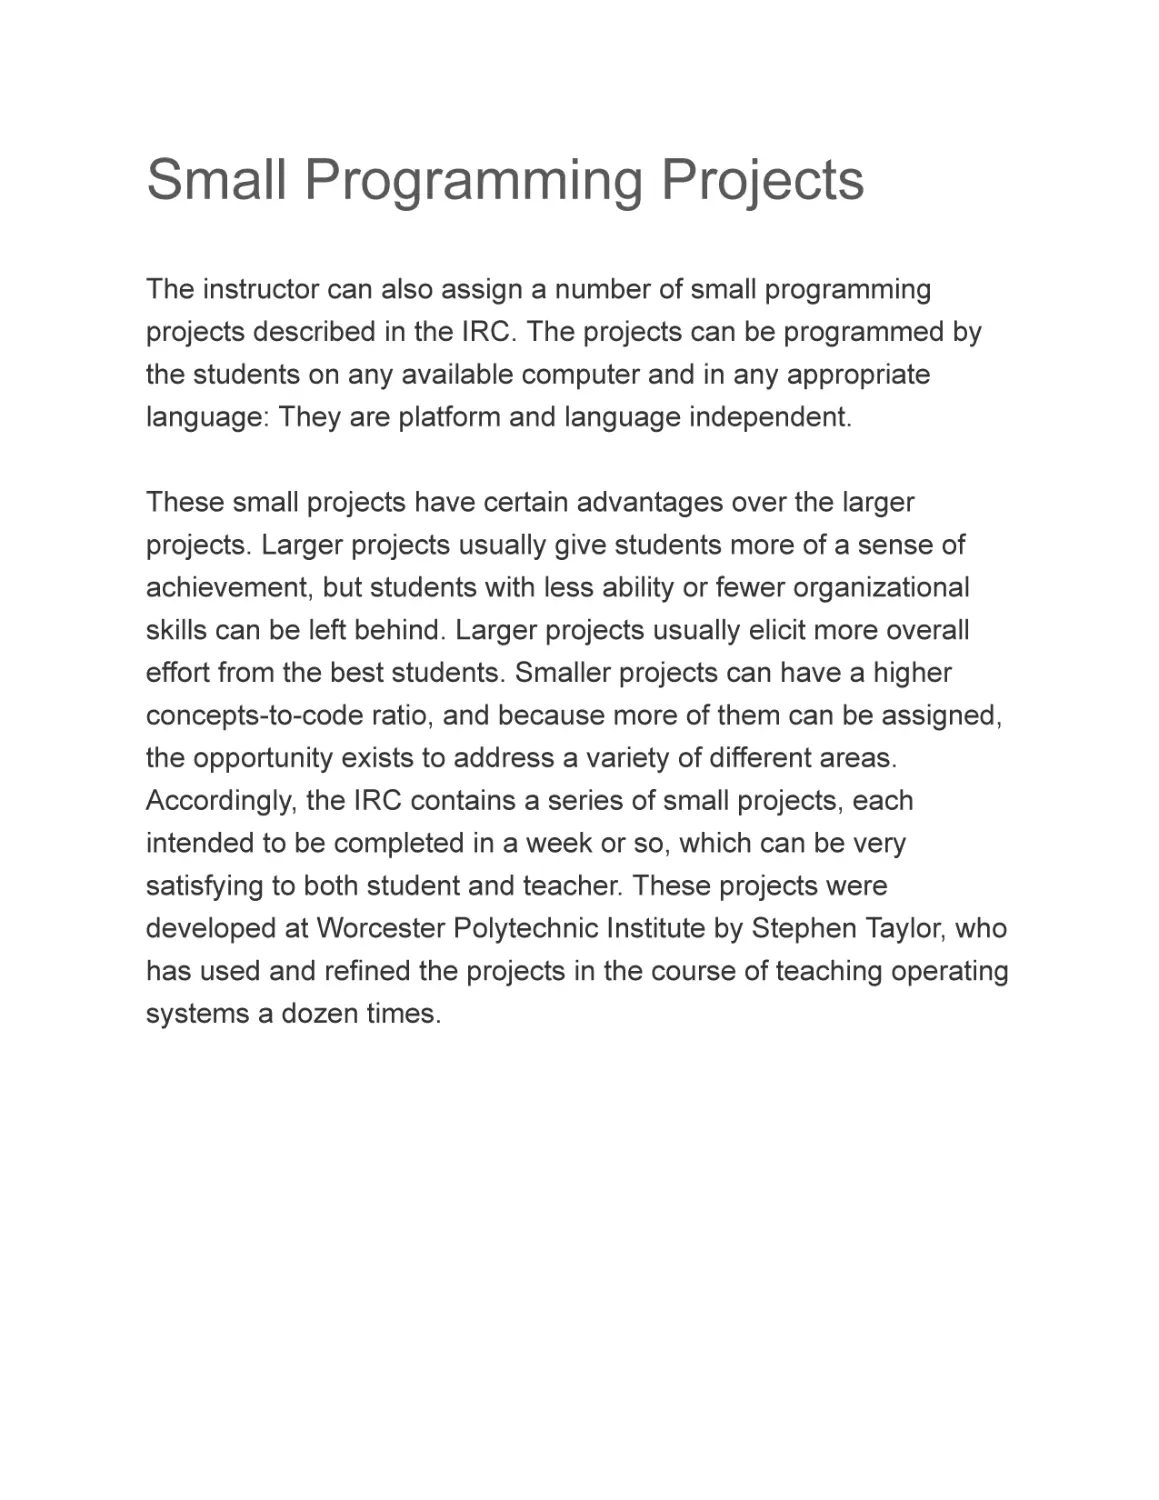 Small Programming Projects